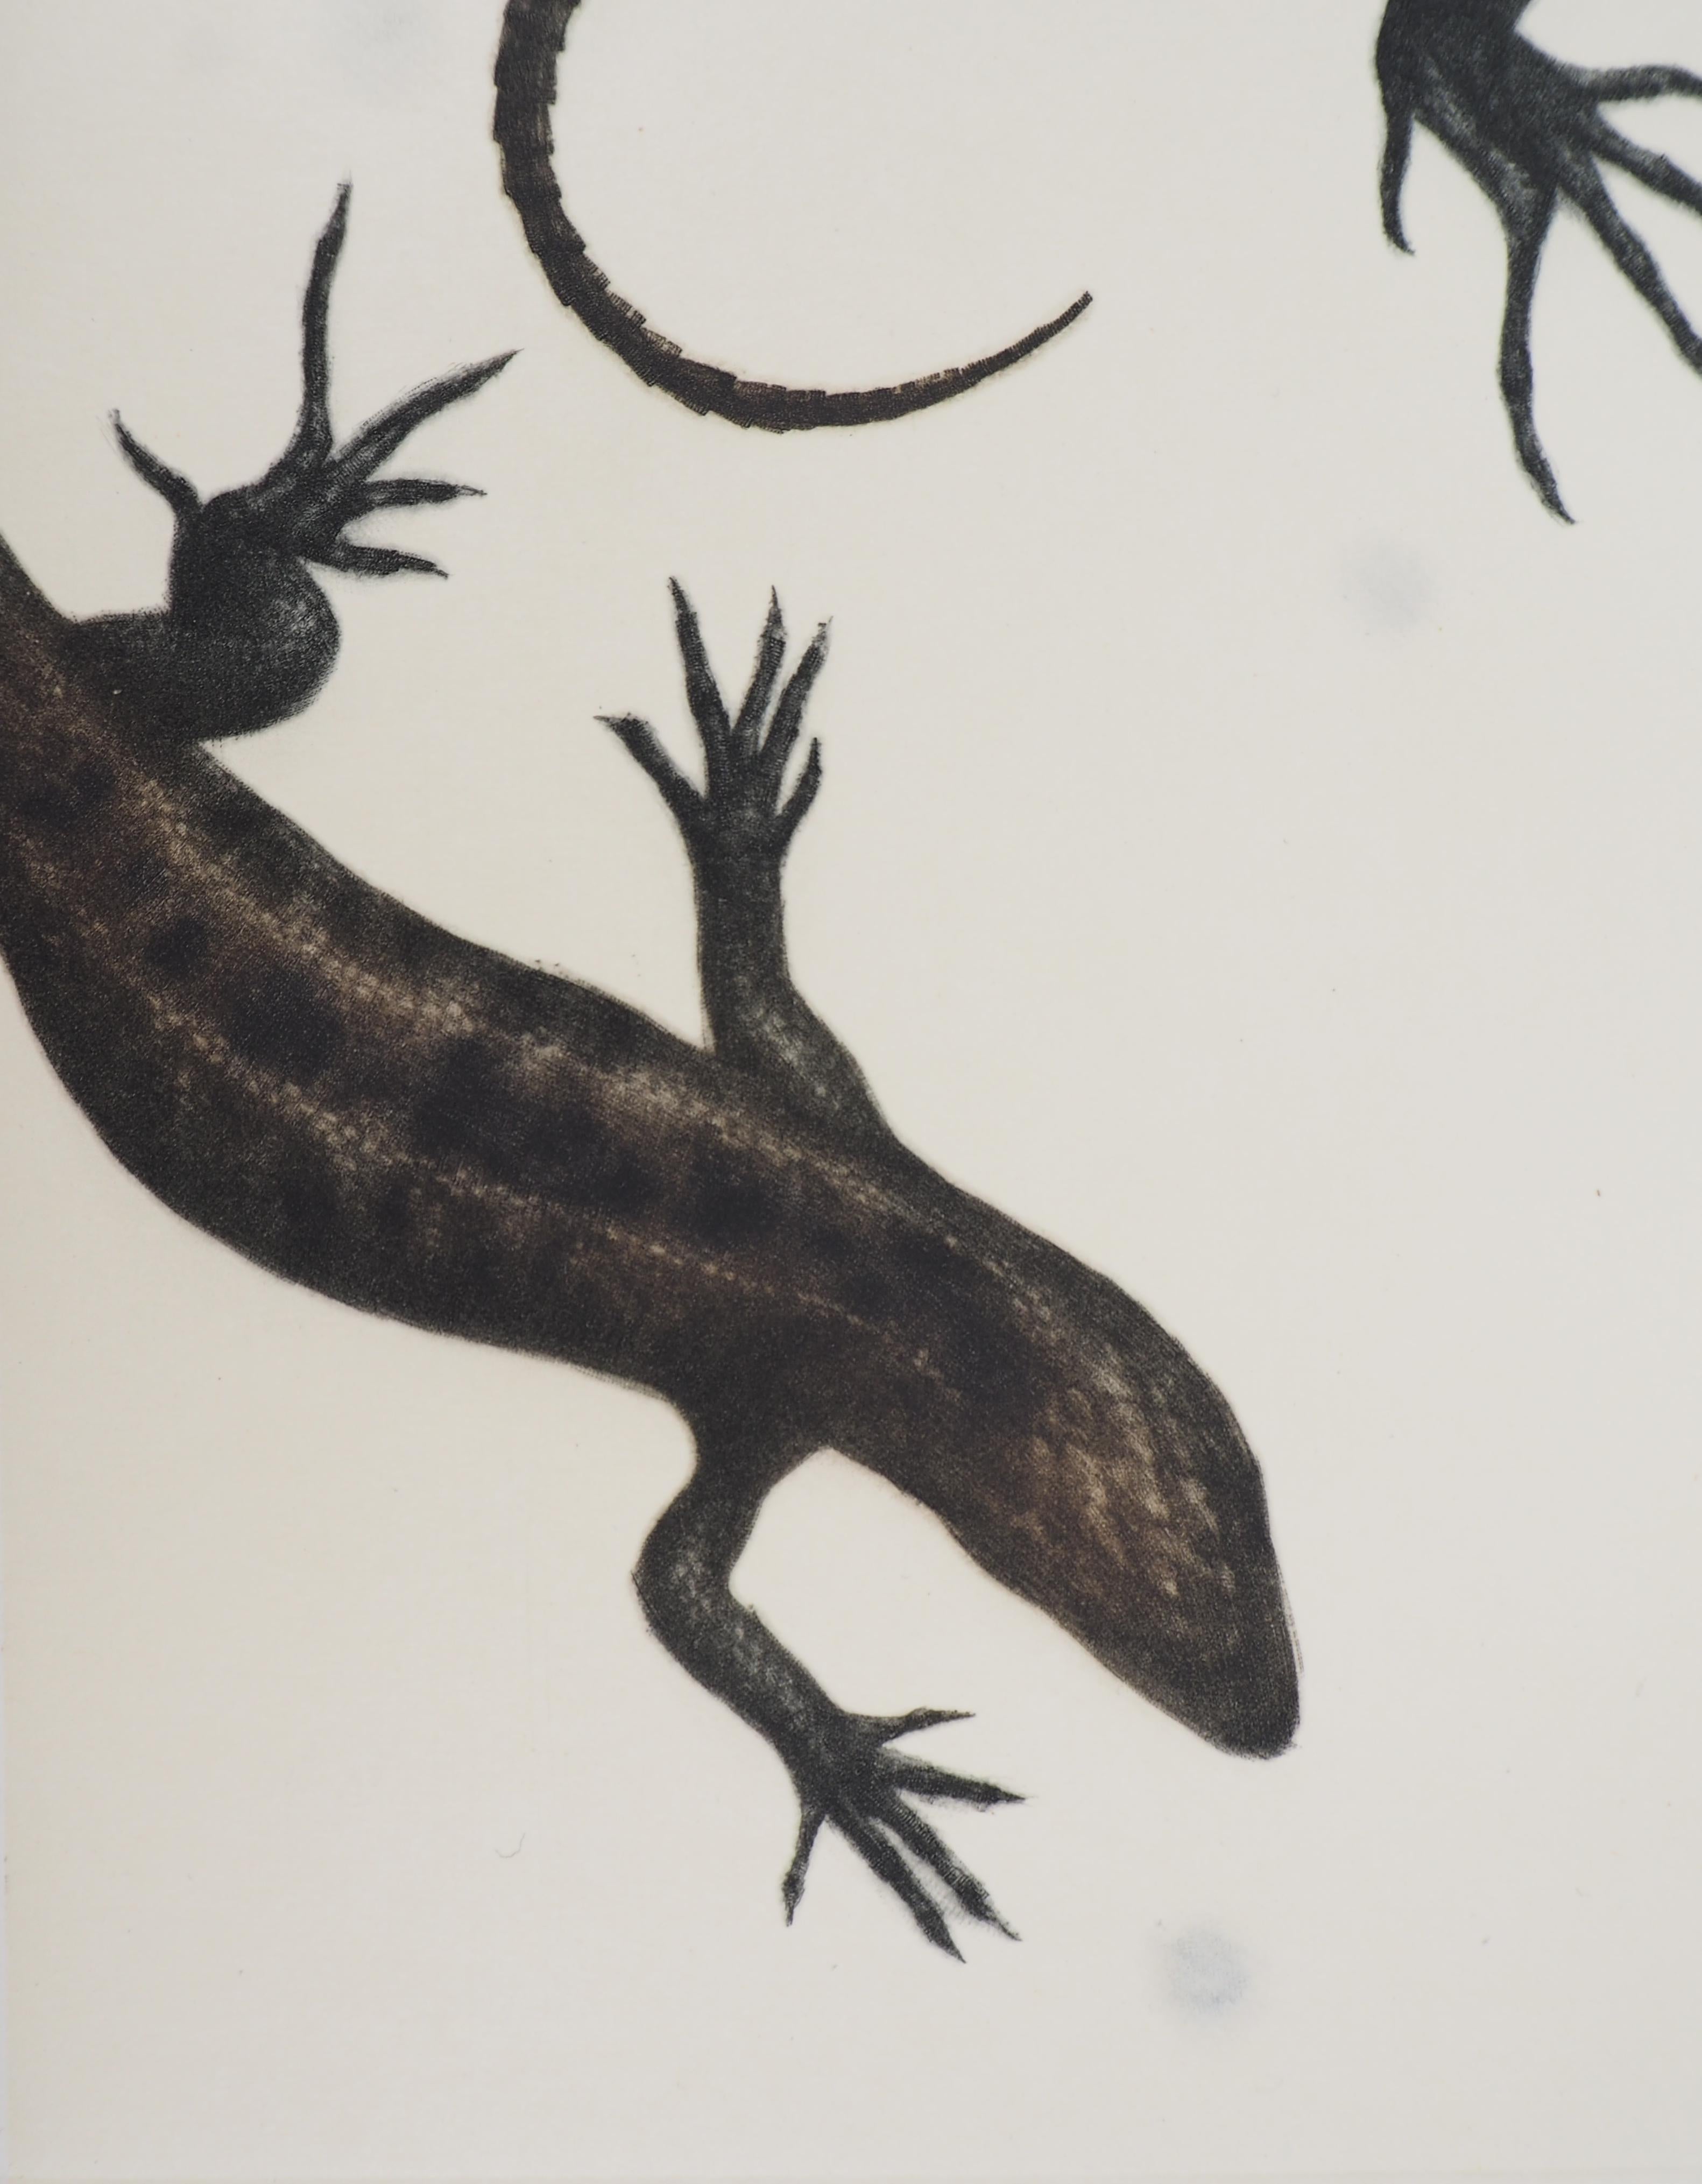 Mikio WATANABE (1954-)
Lizards , 2003

Original etching (Mezzotint)
Signed and dated in pencil
Numbered / 90 ex
On vellum 57 x 35 cm (c. 22.4 x 13.7 inch)

Excellent condition